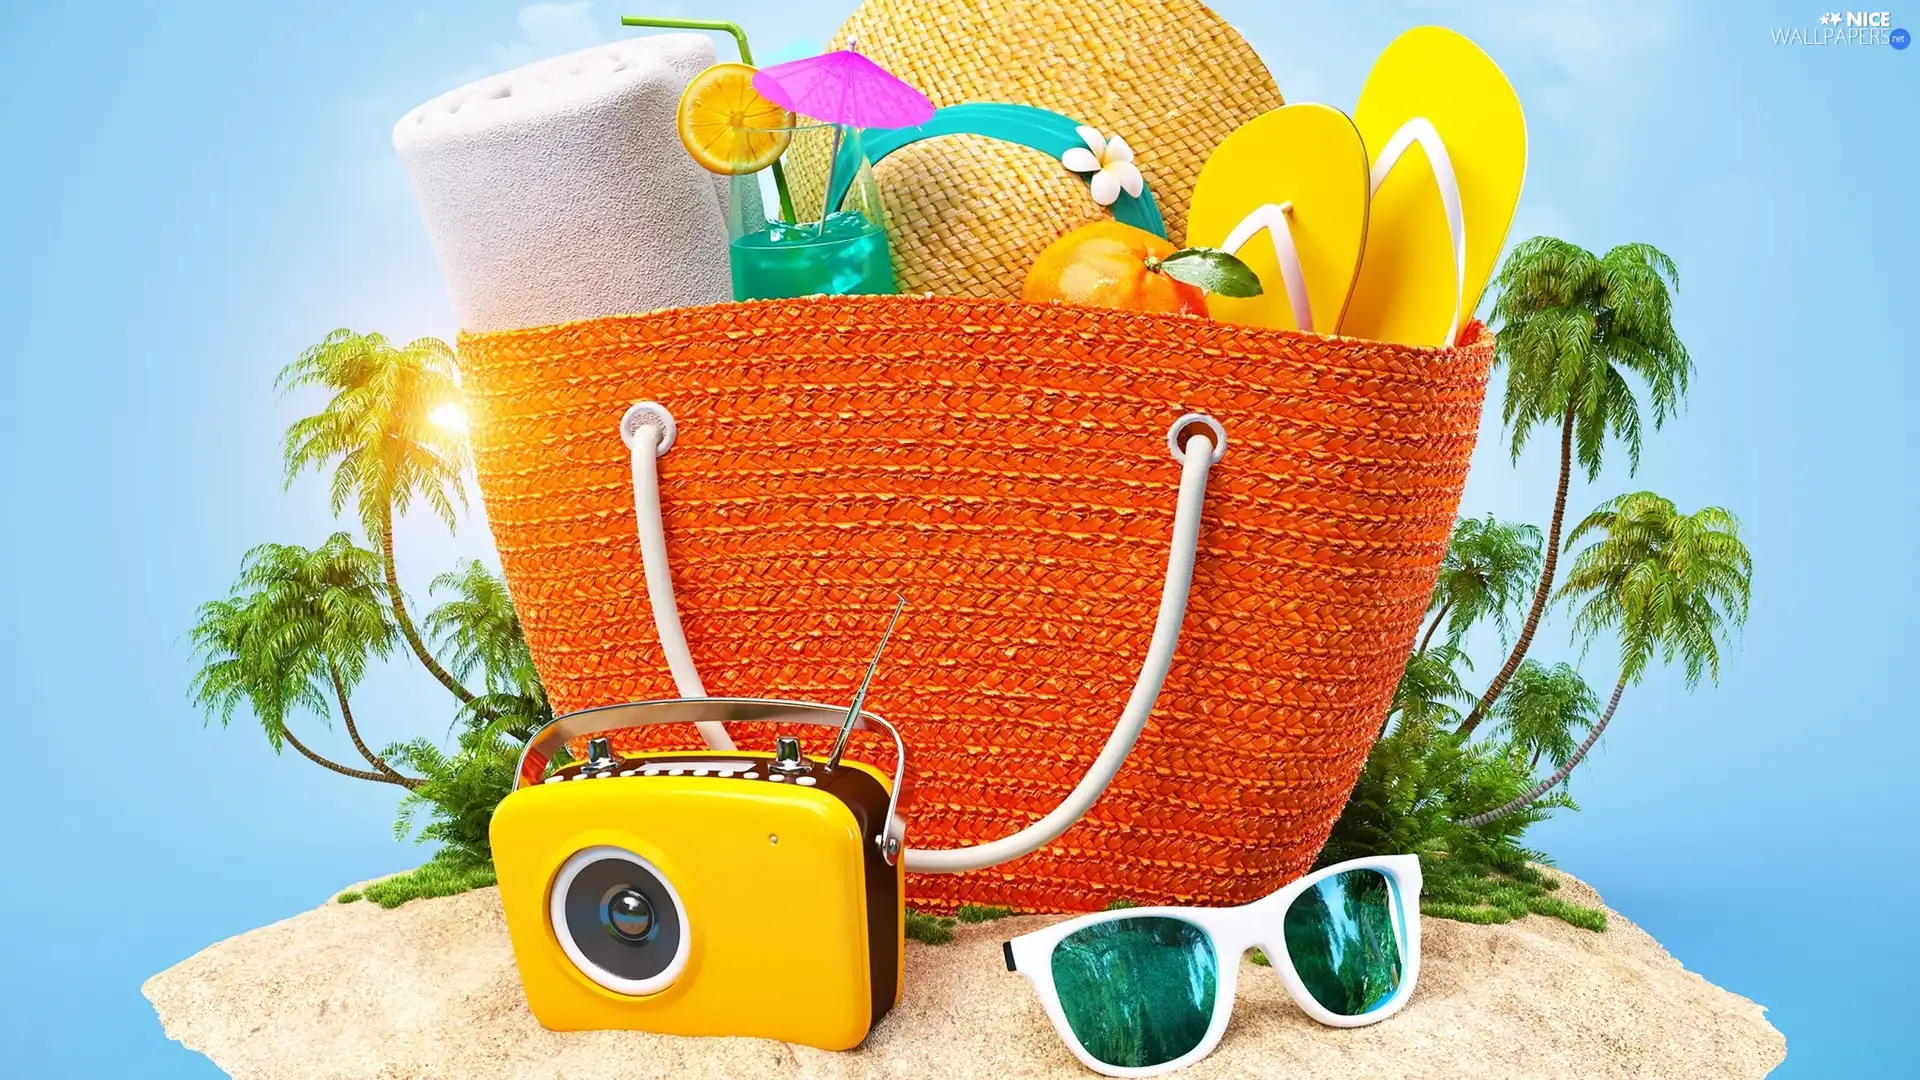 Palms, summer, radio, bag, Flaps, 2D Graphics, Drink, Beaches, holiday, Hat, Glasses